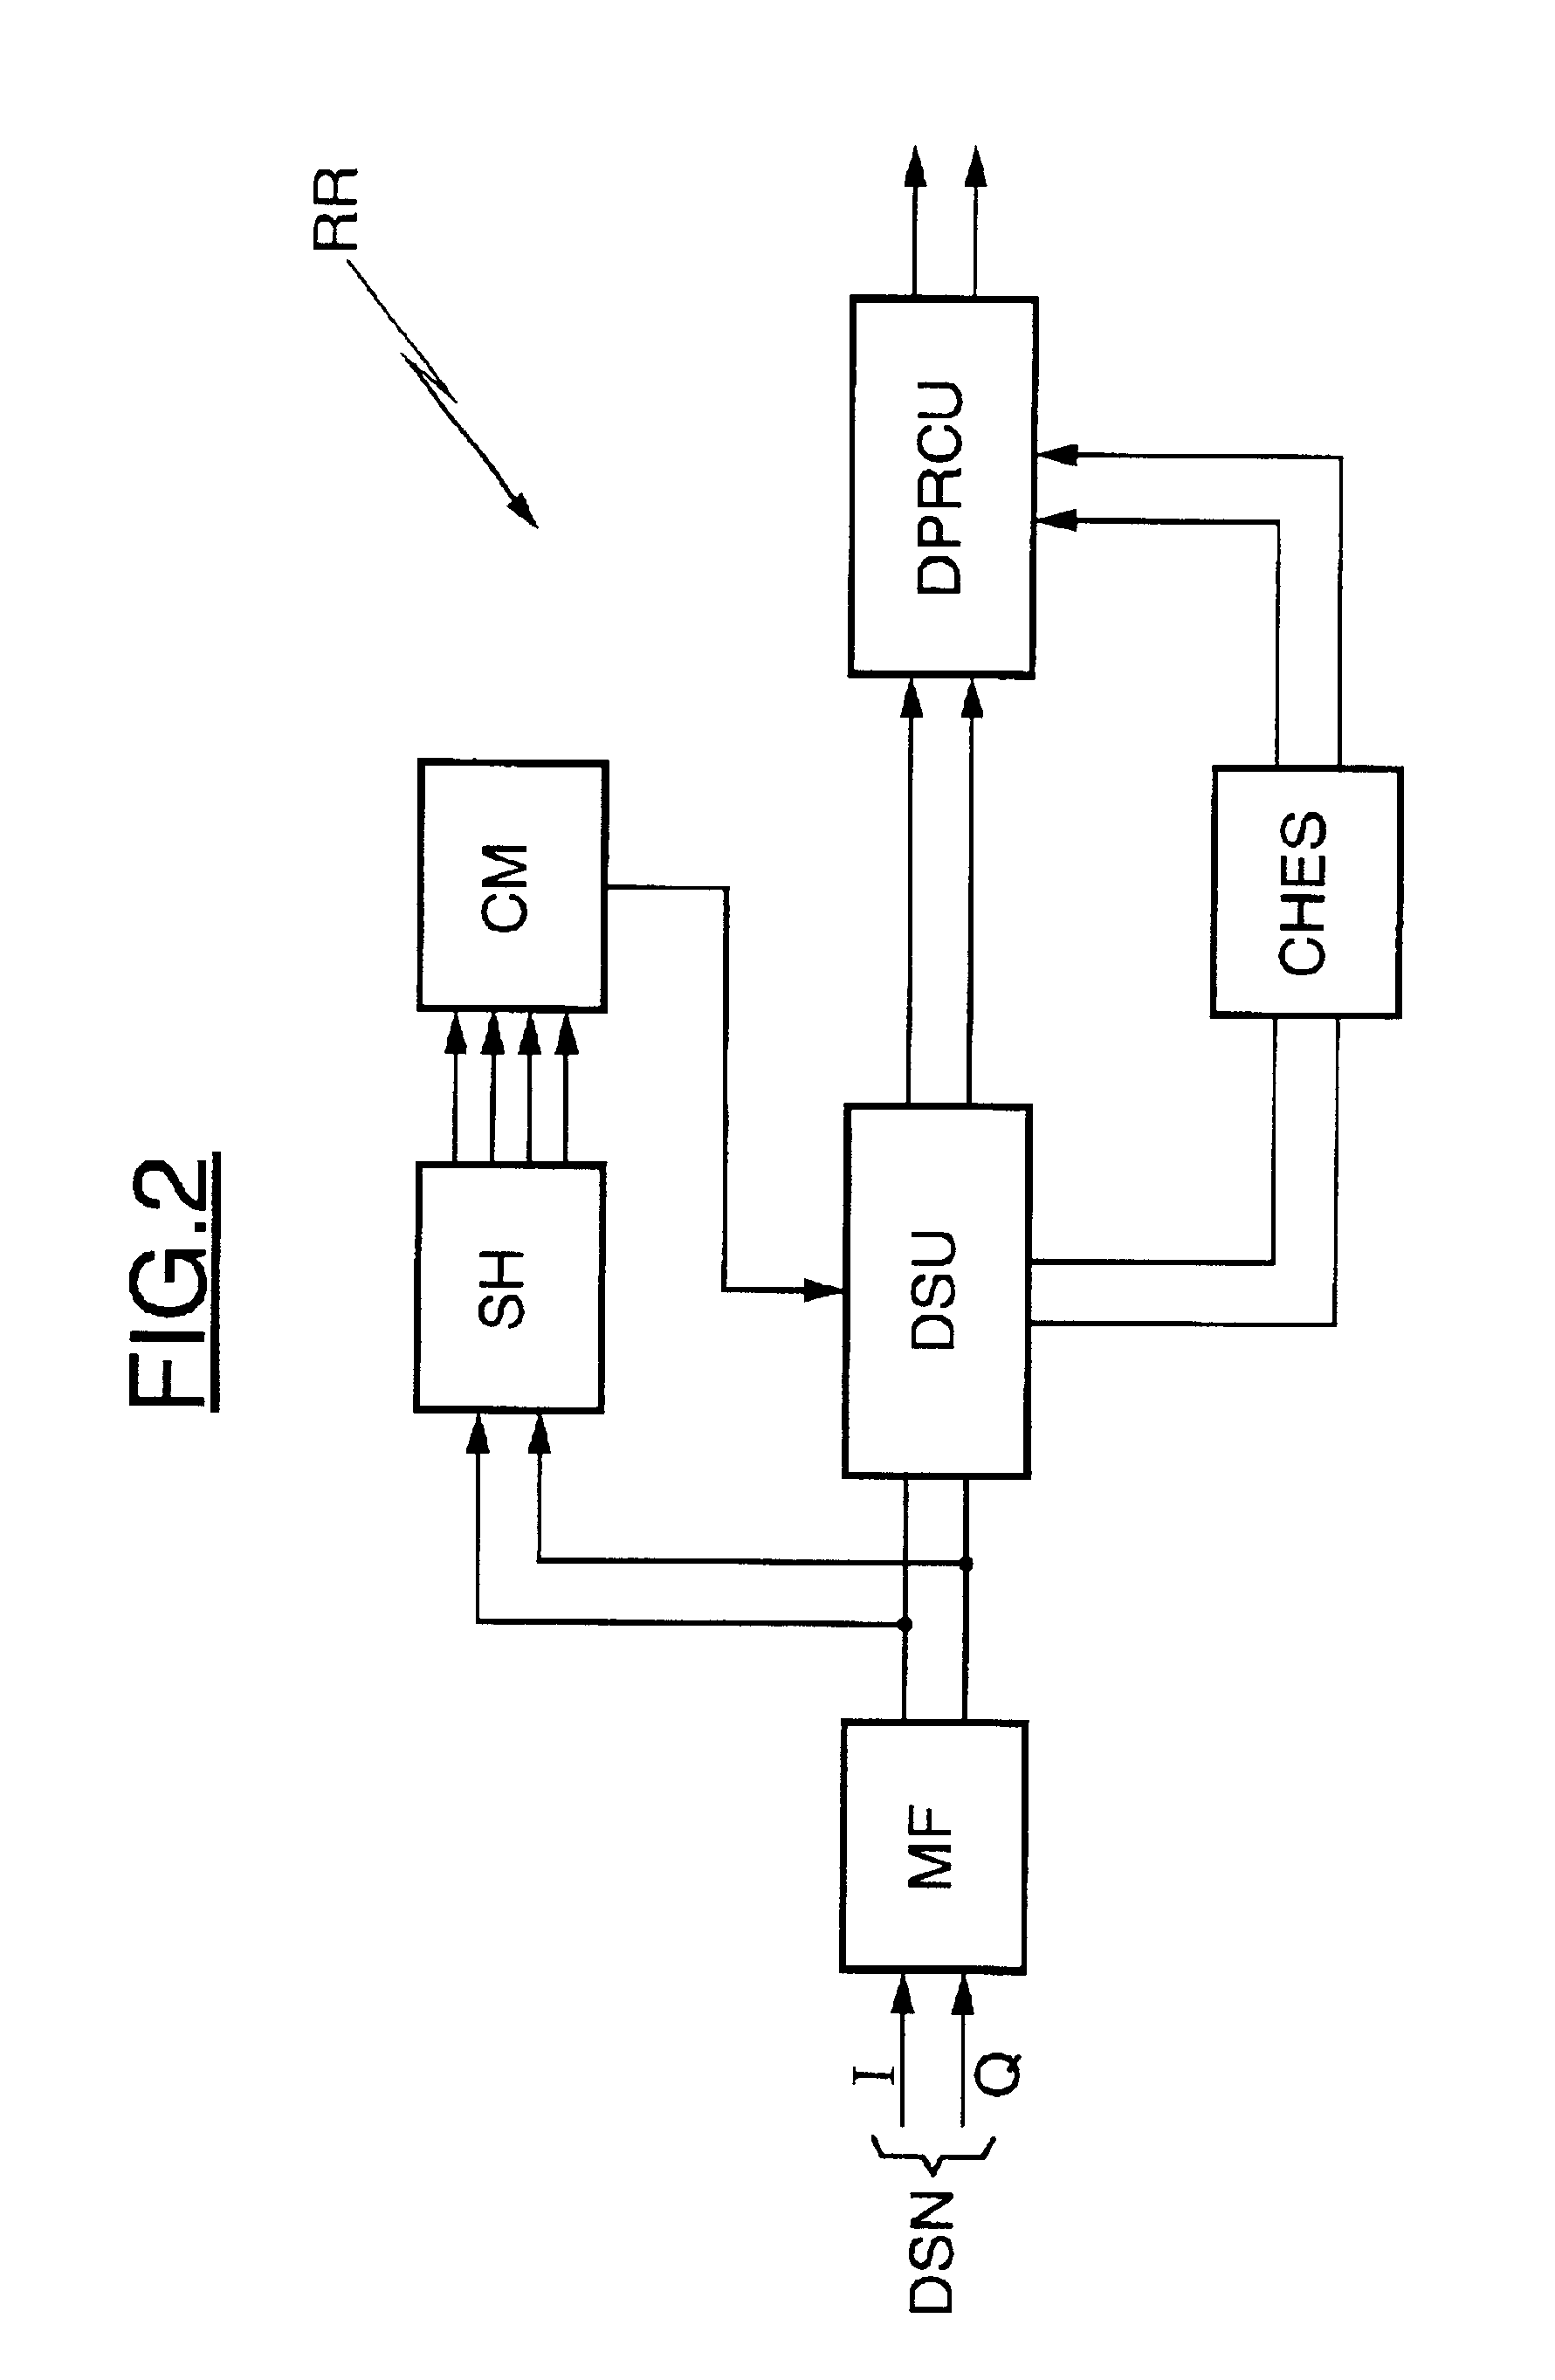 Rake receiver for a CDMA system, in particular incorporated in a cellular mobile phone